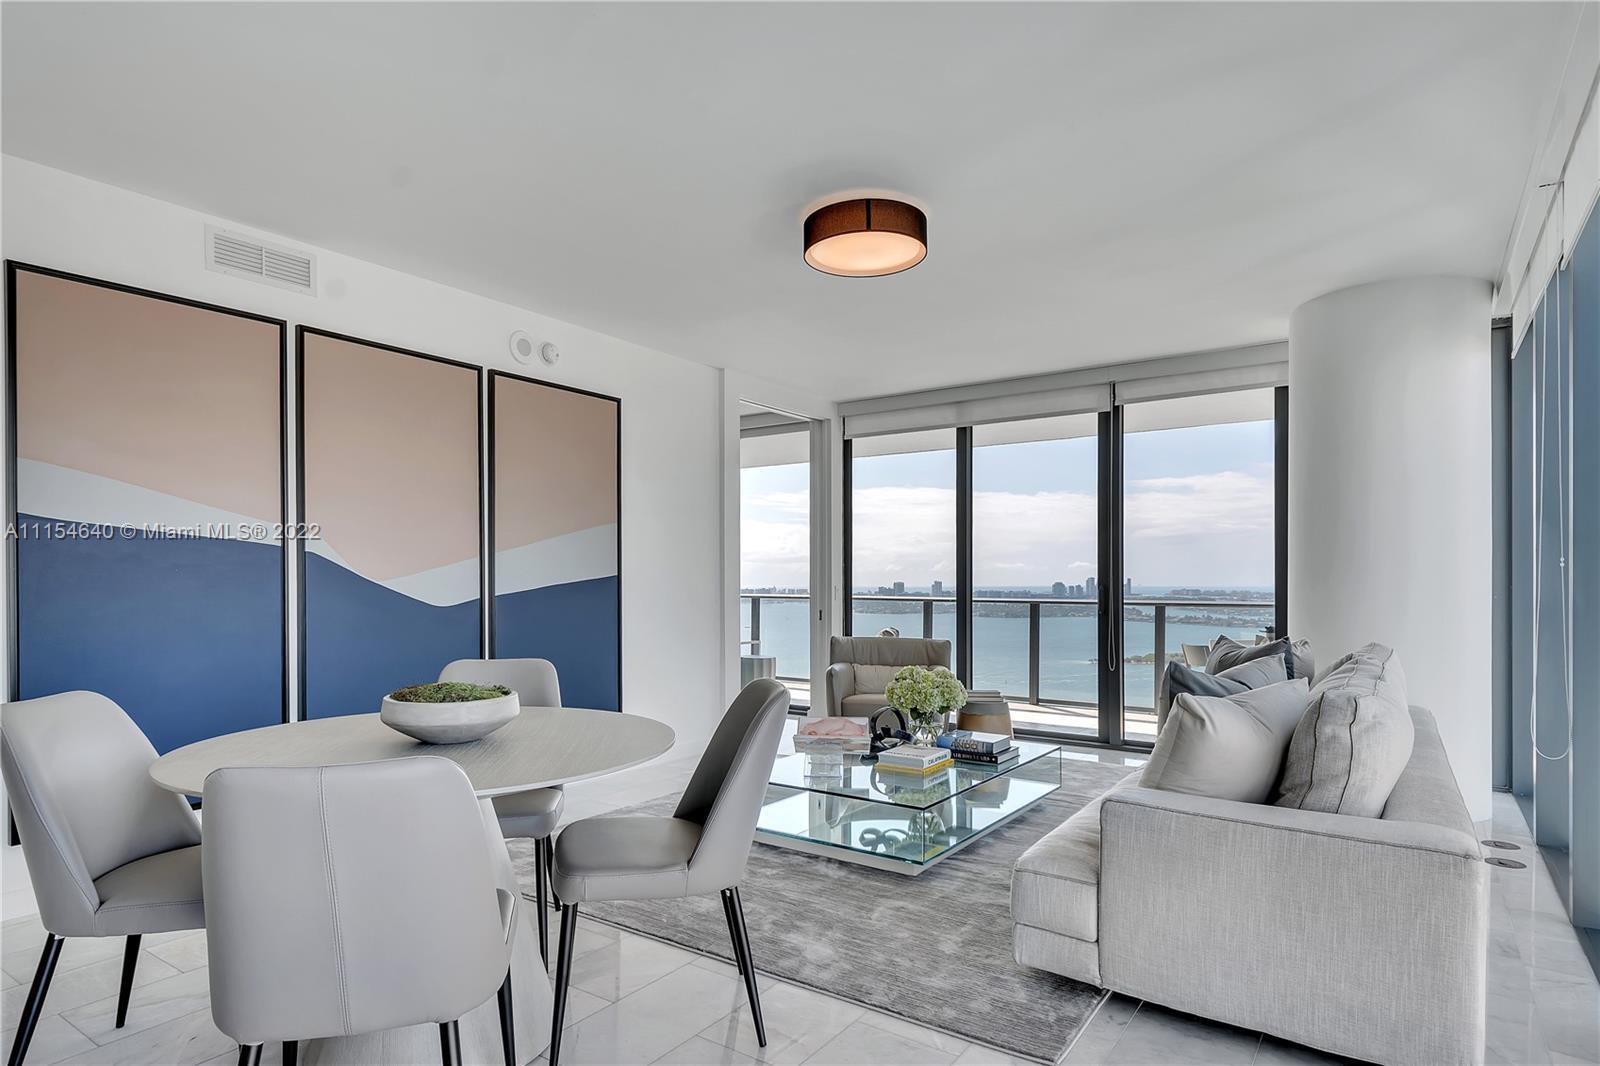 Welcome to your luxury waterfront home in Edgewater, Miami. The living at Paraiso Bay is scenic, ser